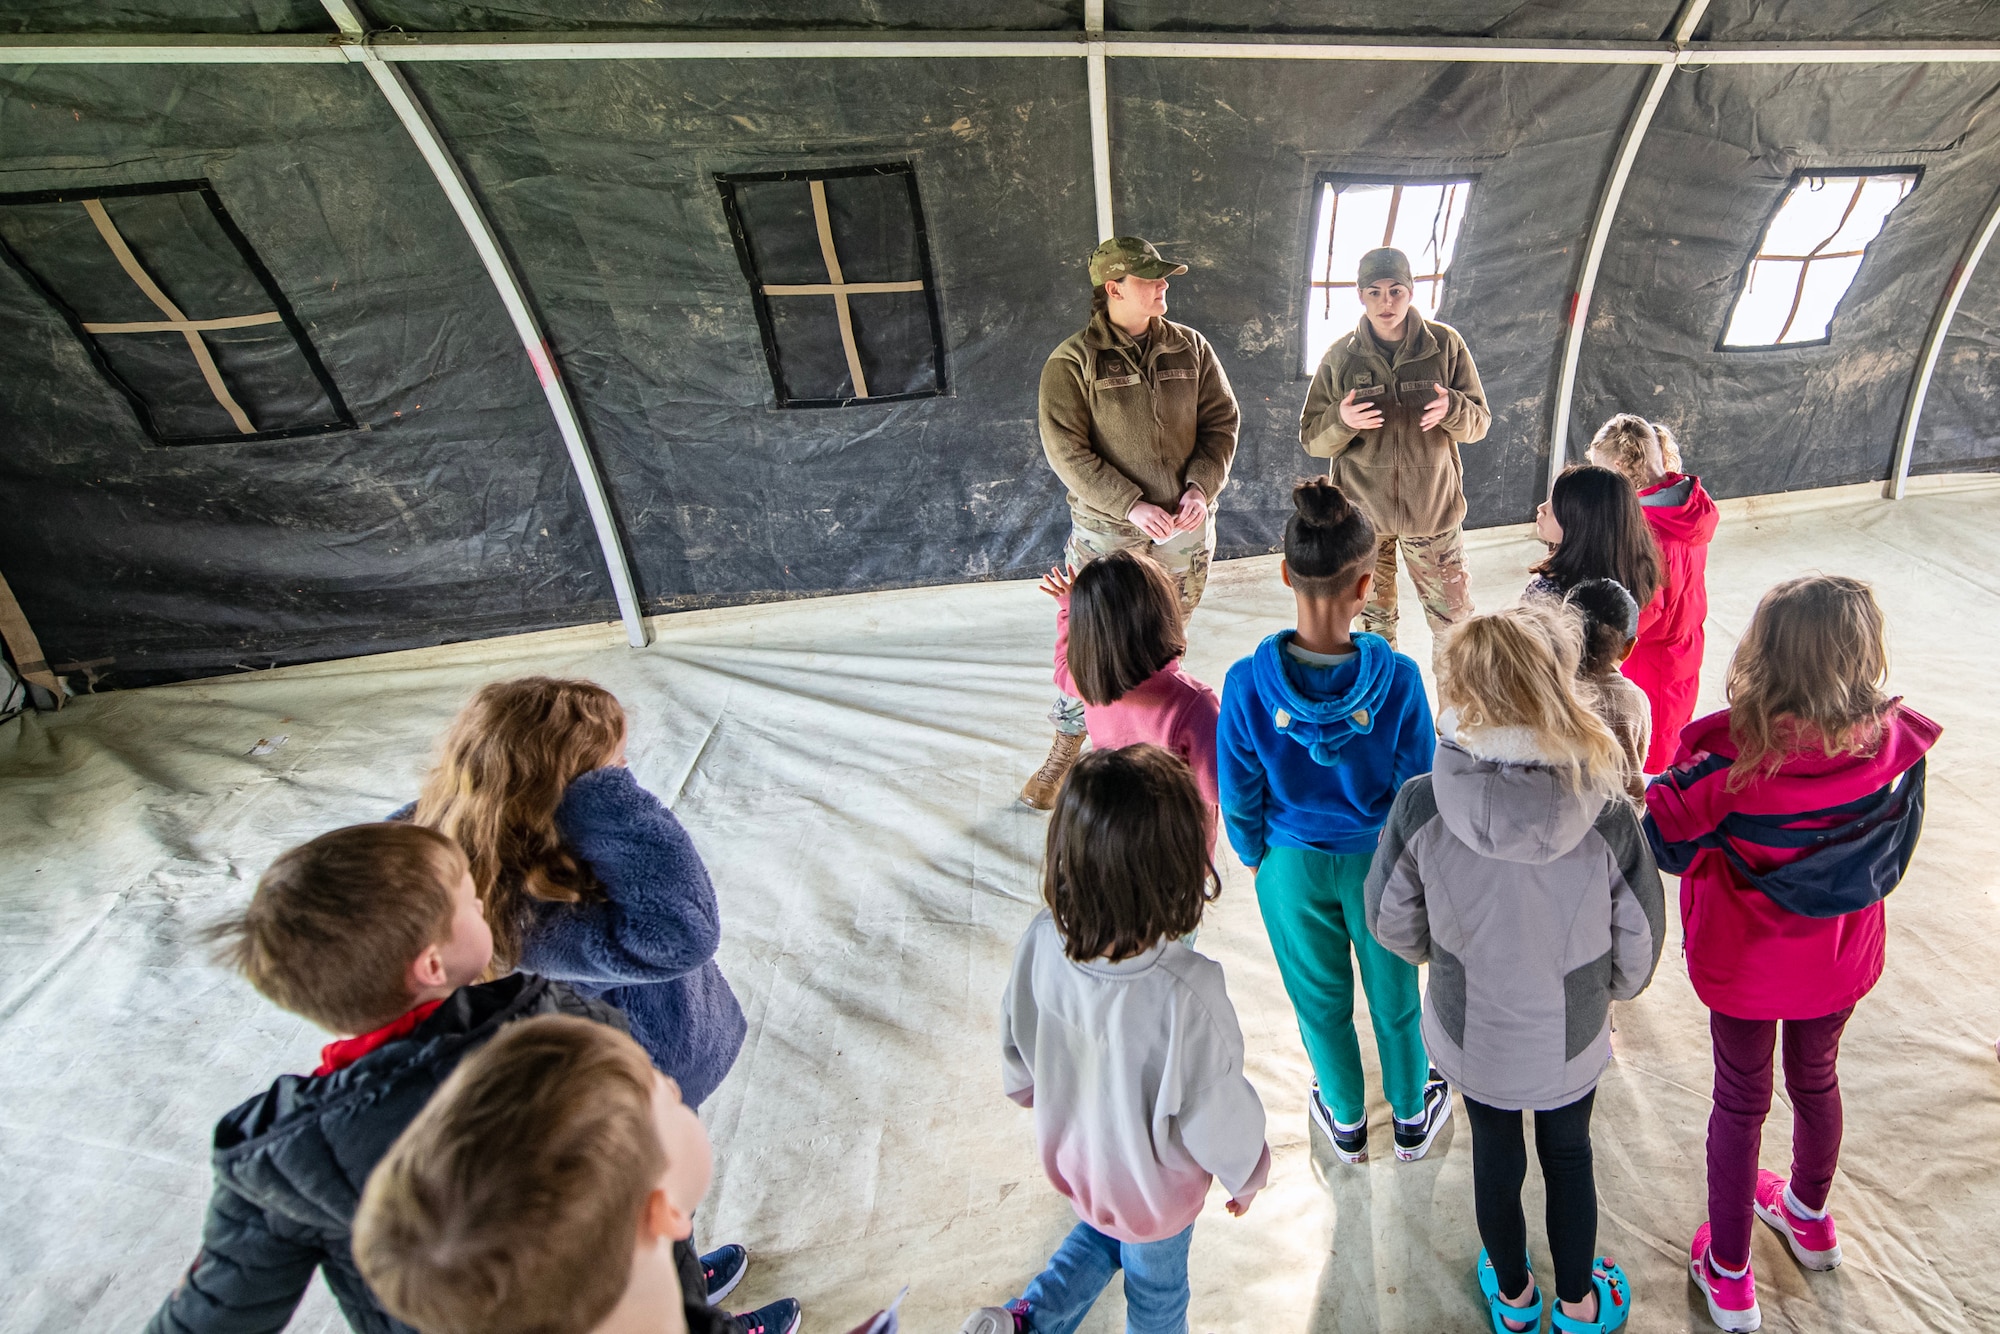 Airmen from the 423d Force Support Squadron, brief Alconbury Elementary school students during Camp Kudos at RAF Alconbury, England, April 14, 2023. The camp gave students the opportunity to experience and learn about various aspects of deployment preparation and the wing mission. (U.S. Air Force photo by Staff Sgt. Eugene Oliver)